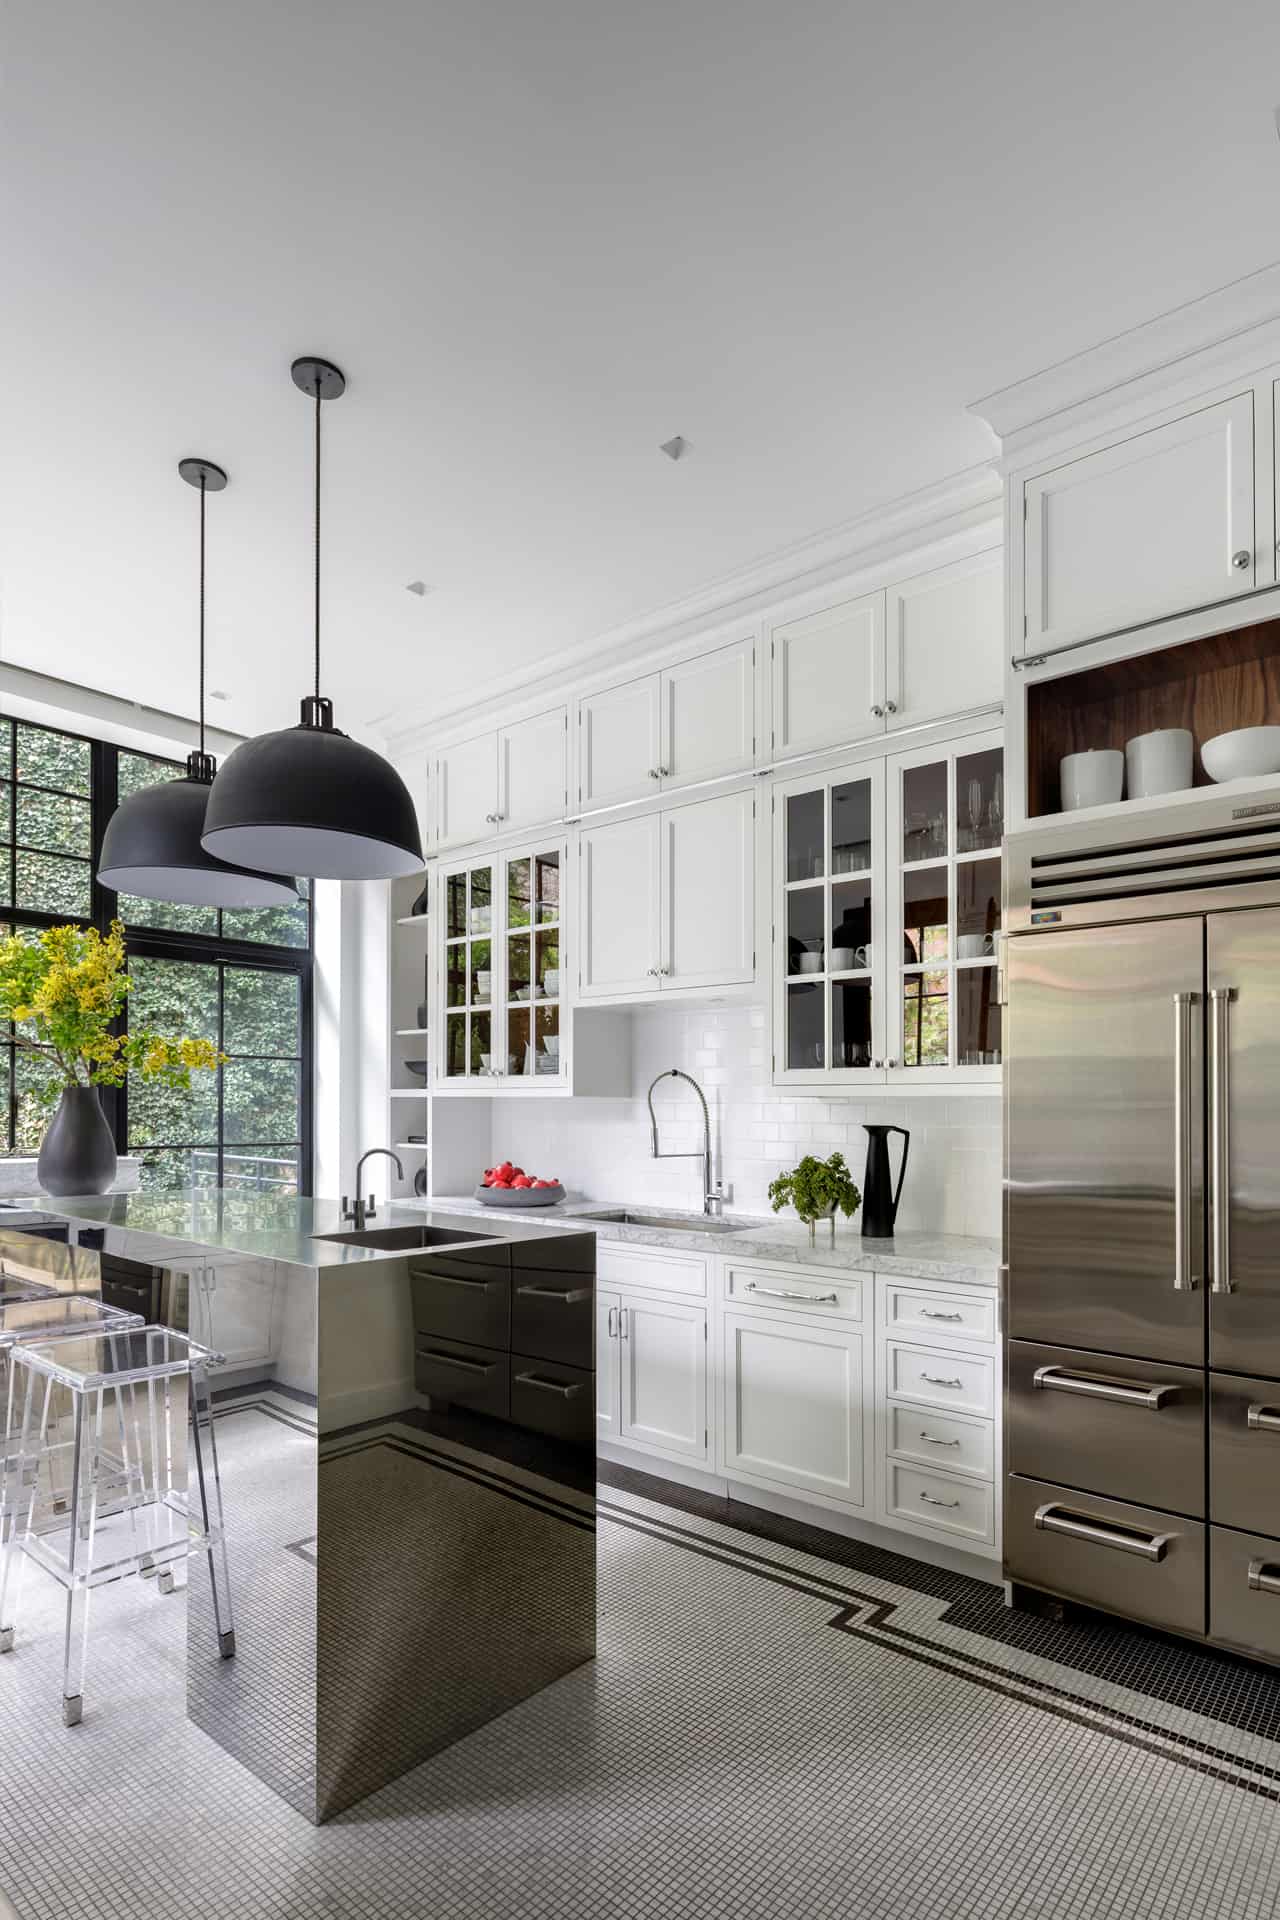 Art Deco inspired kitchen features white Bilotta cabinets with honed black granite countertops and a black island with polished white Caesarstone top.